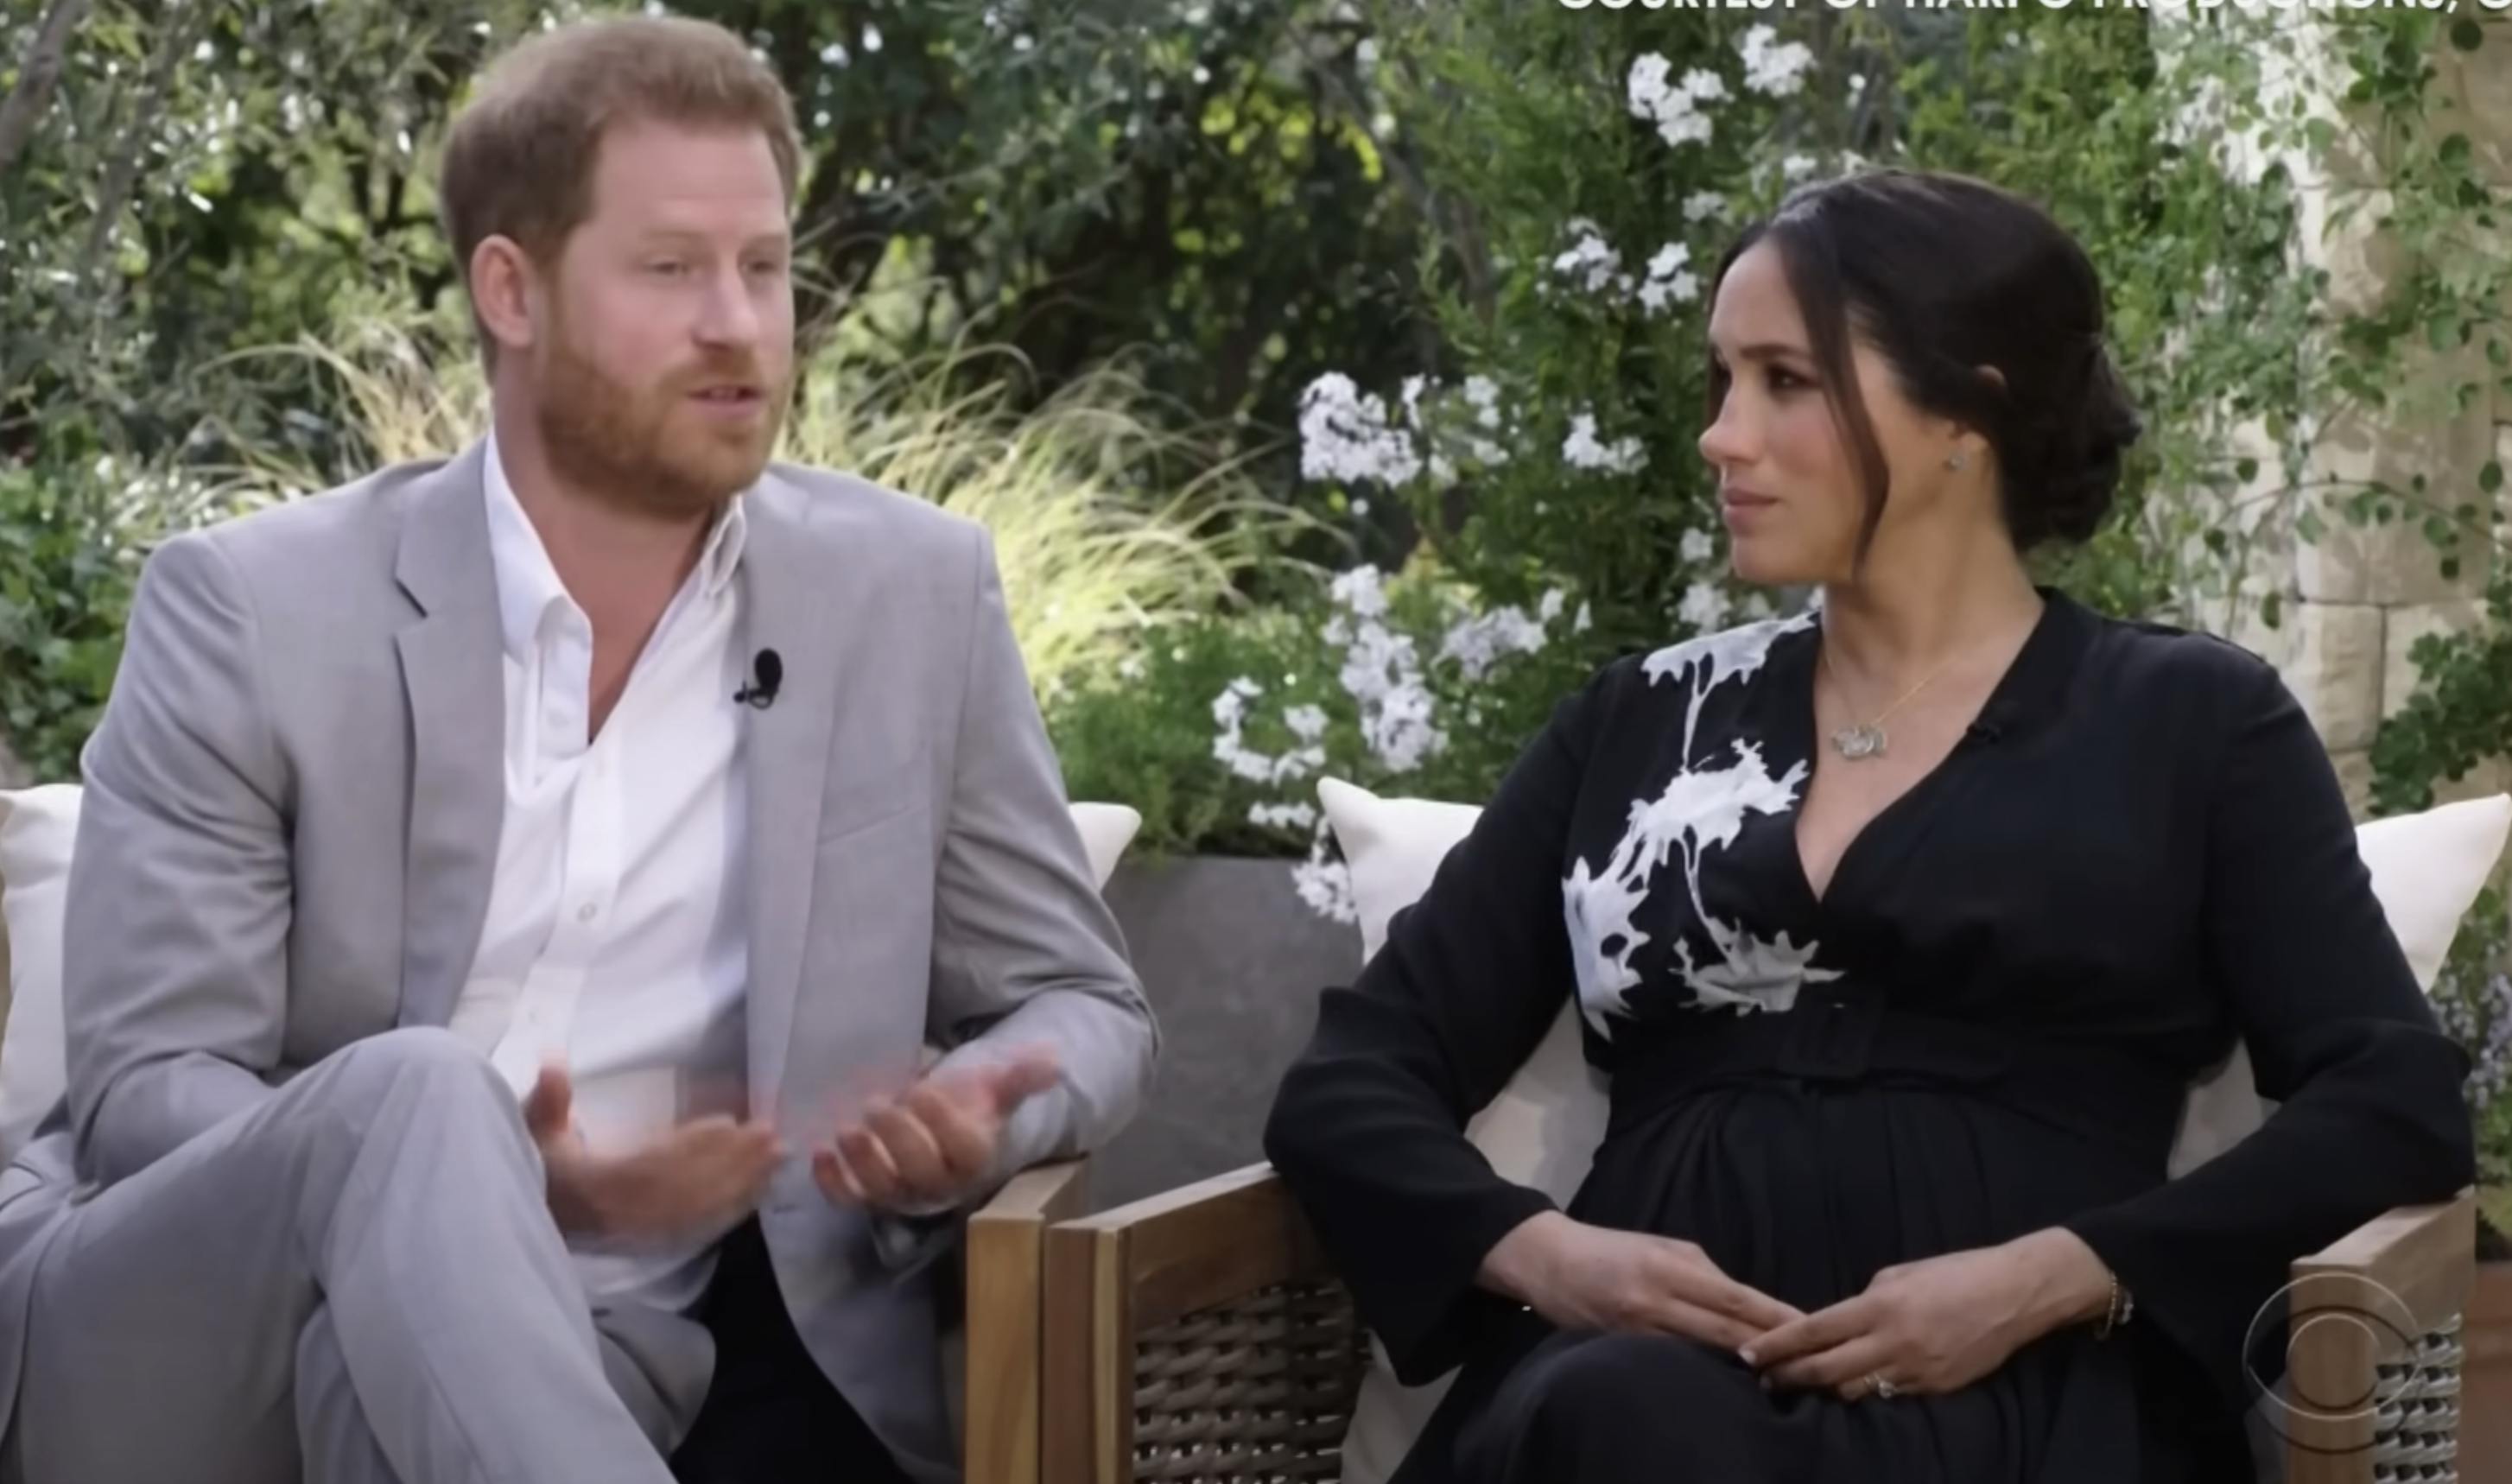 Prince Harry and Meghan Markle seated during an interview with Oprah, Meghan in a black dress with white patterns